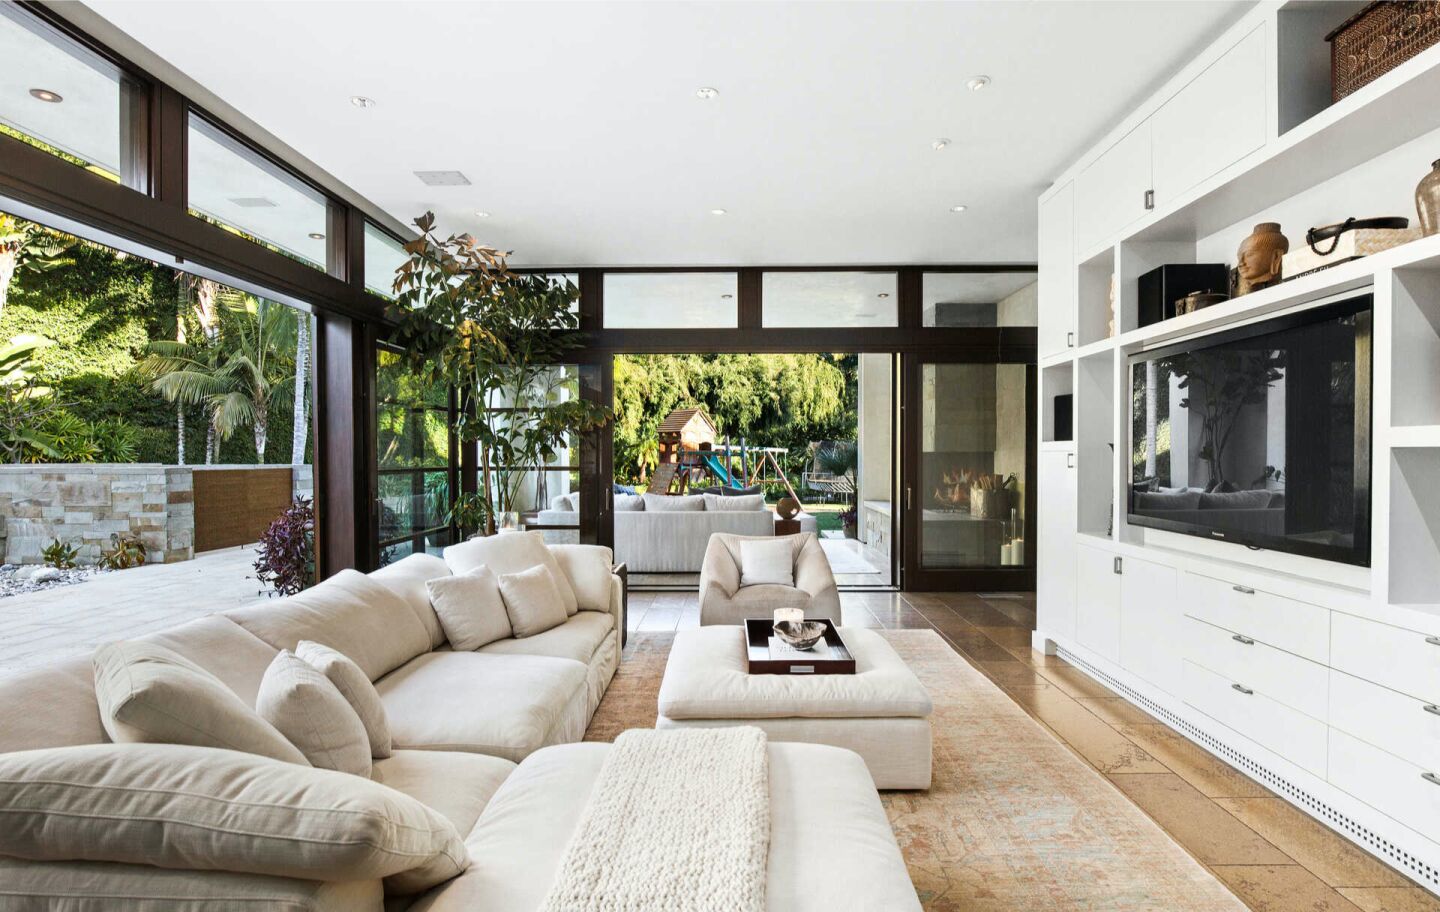 The furnished family room with a built-in TV and big windows looking out on trees.